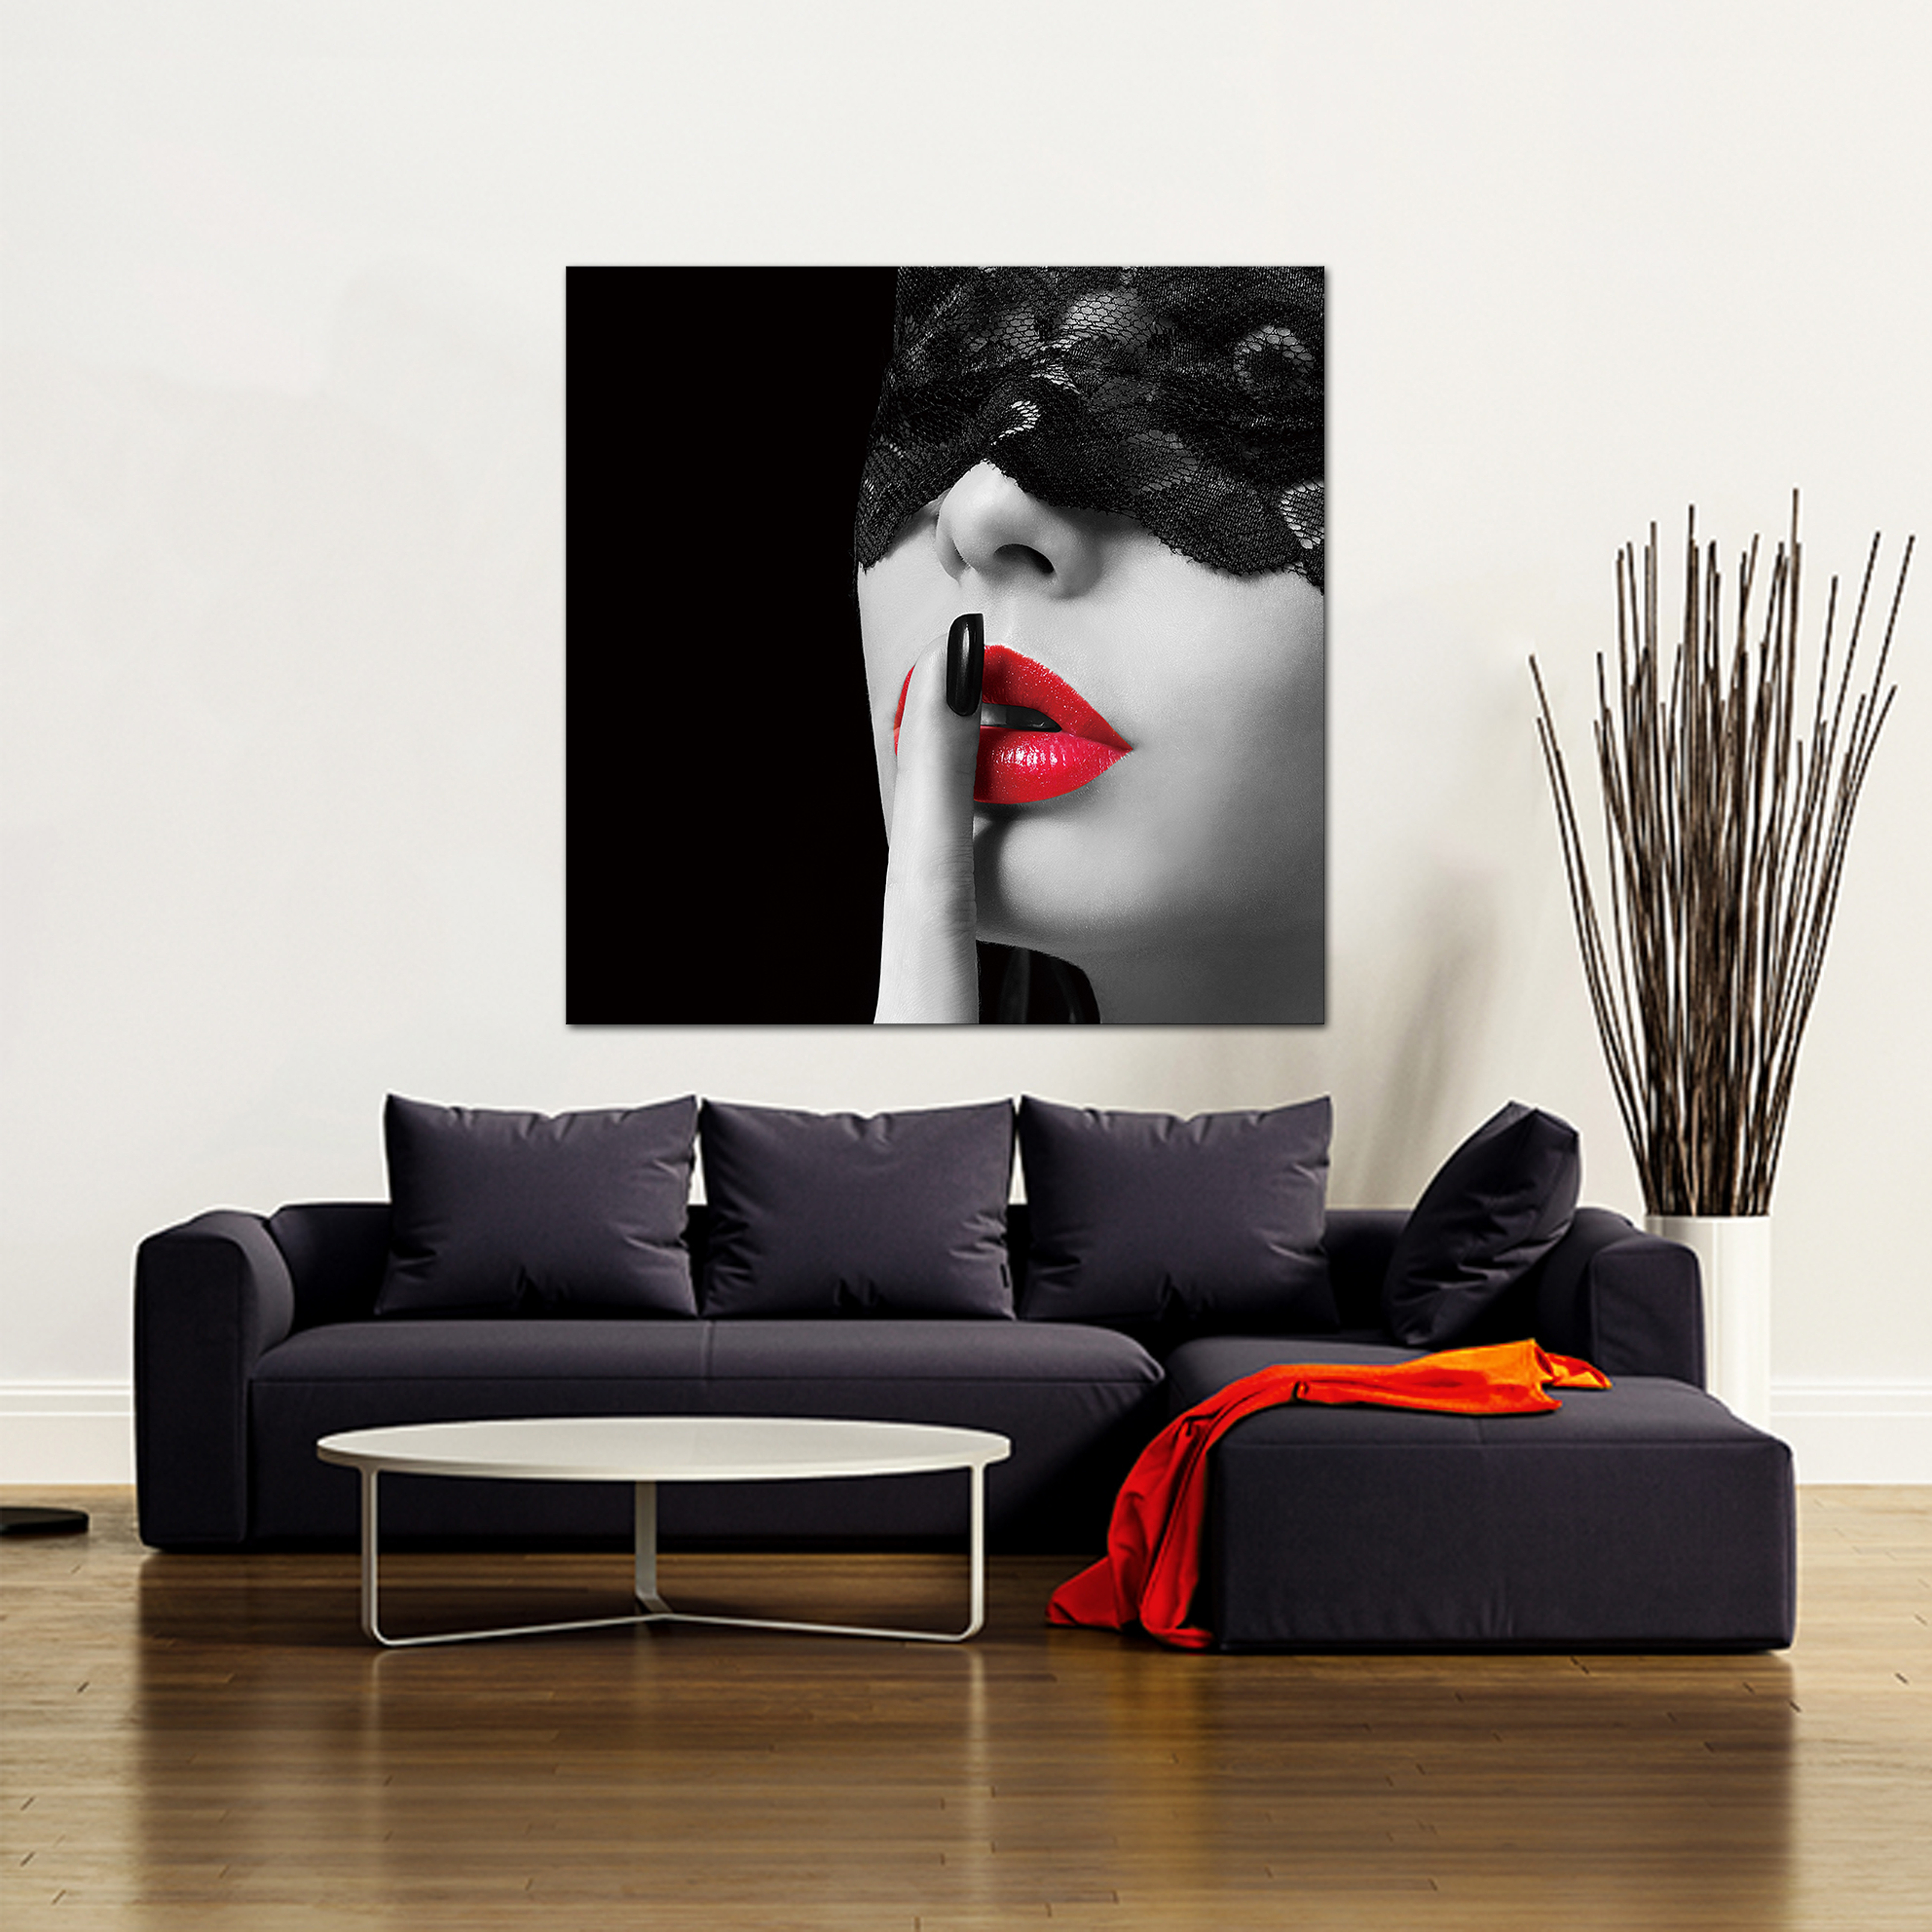 wall deco prints Vintage glamour and seduction prints *UNFRAMED*